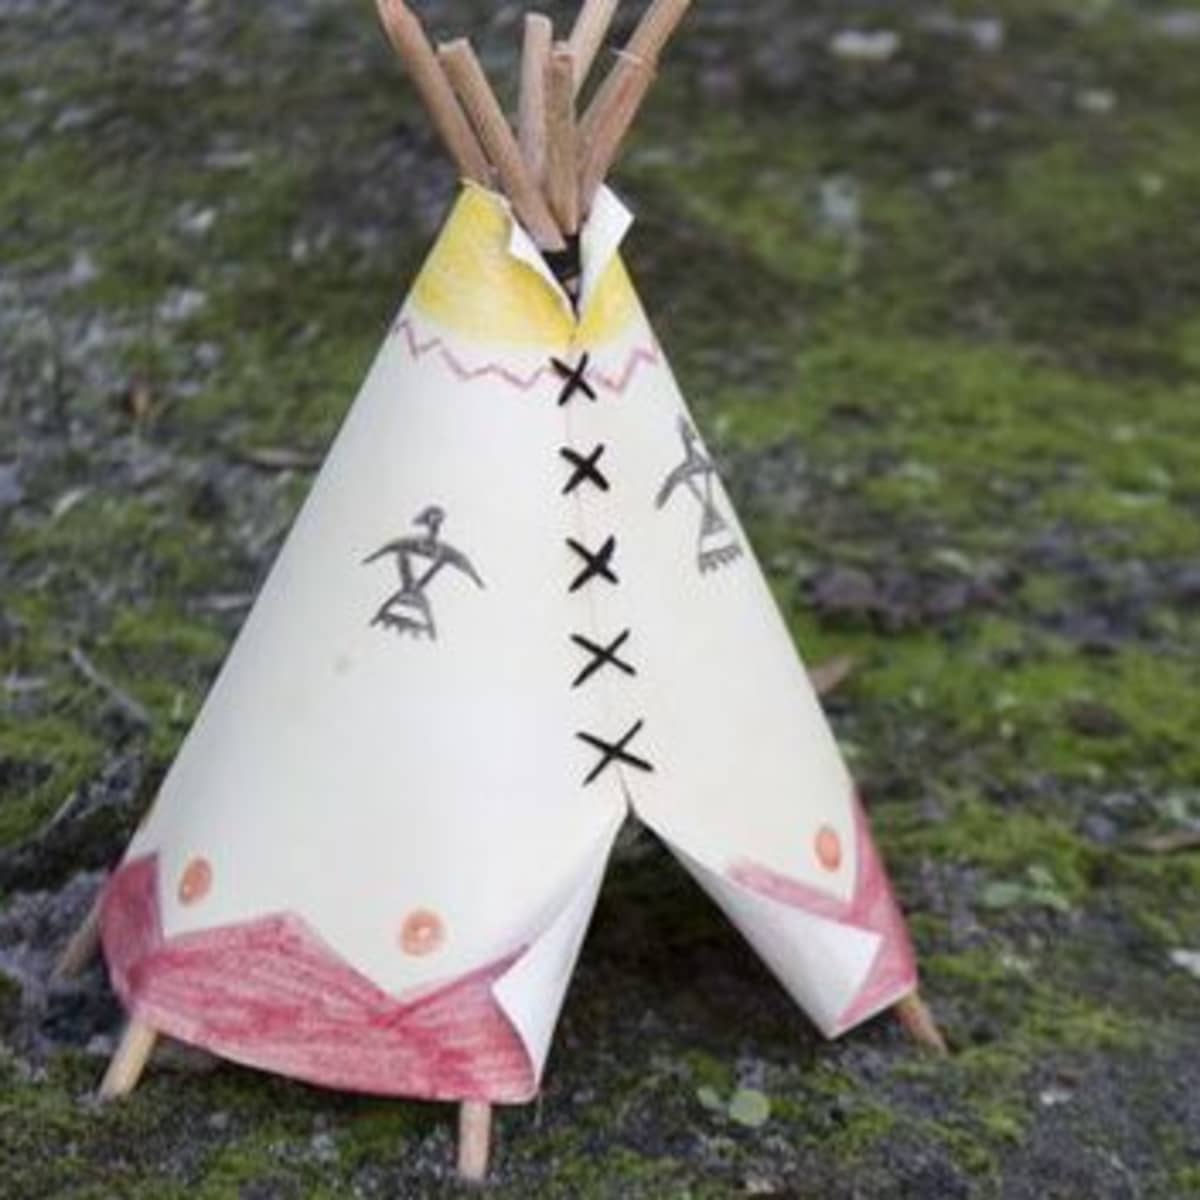 40 Excellent Native American Arts and Crafts Projects for Kids